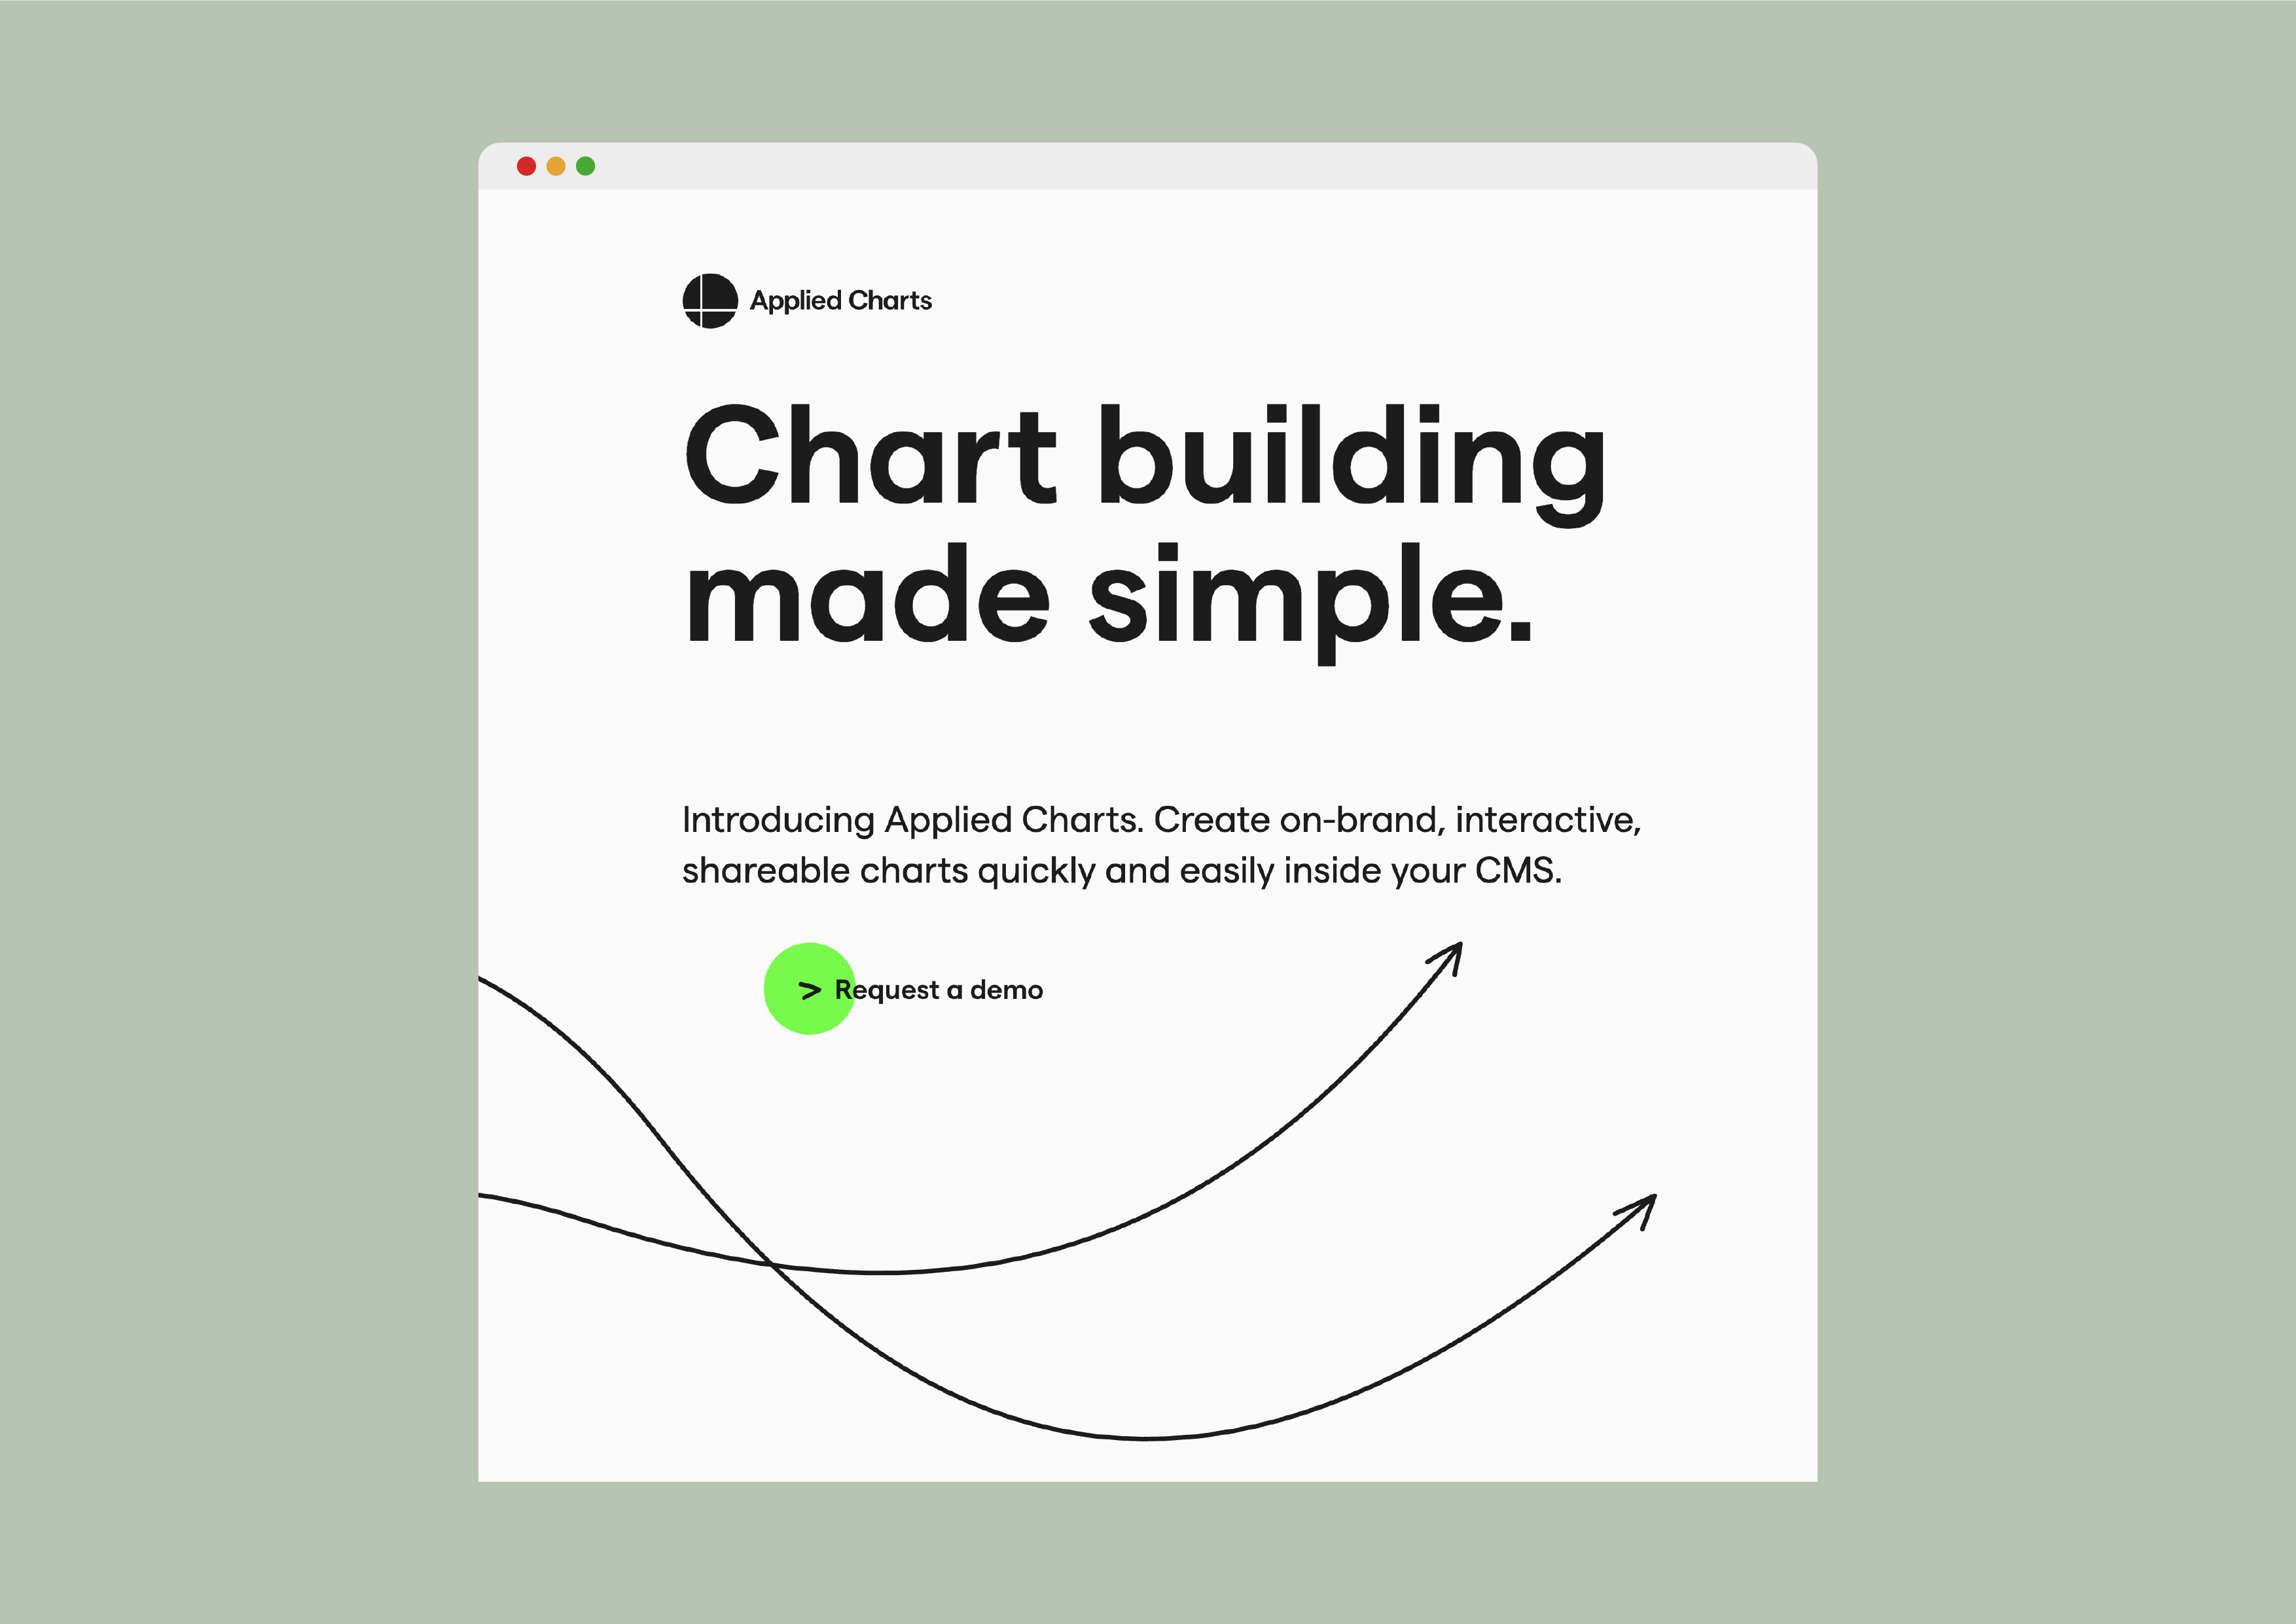 Applied Charts